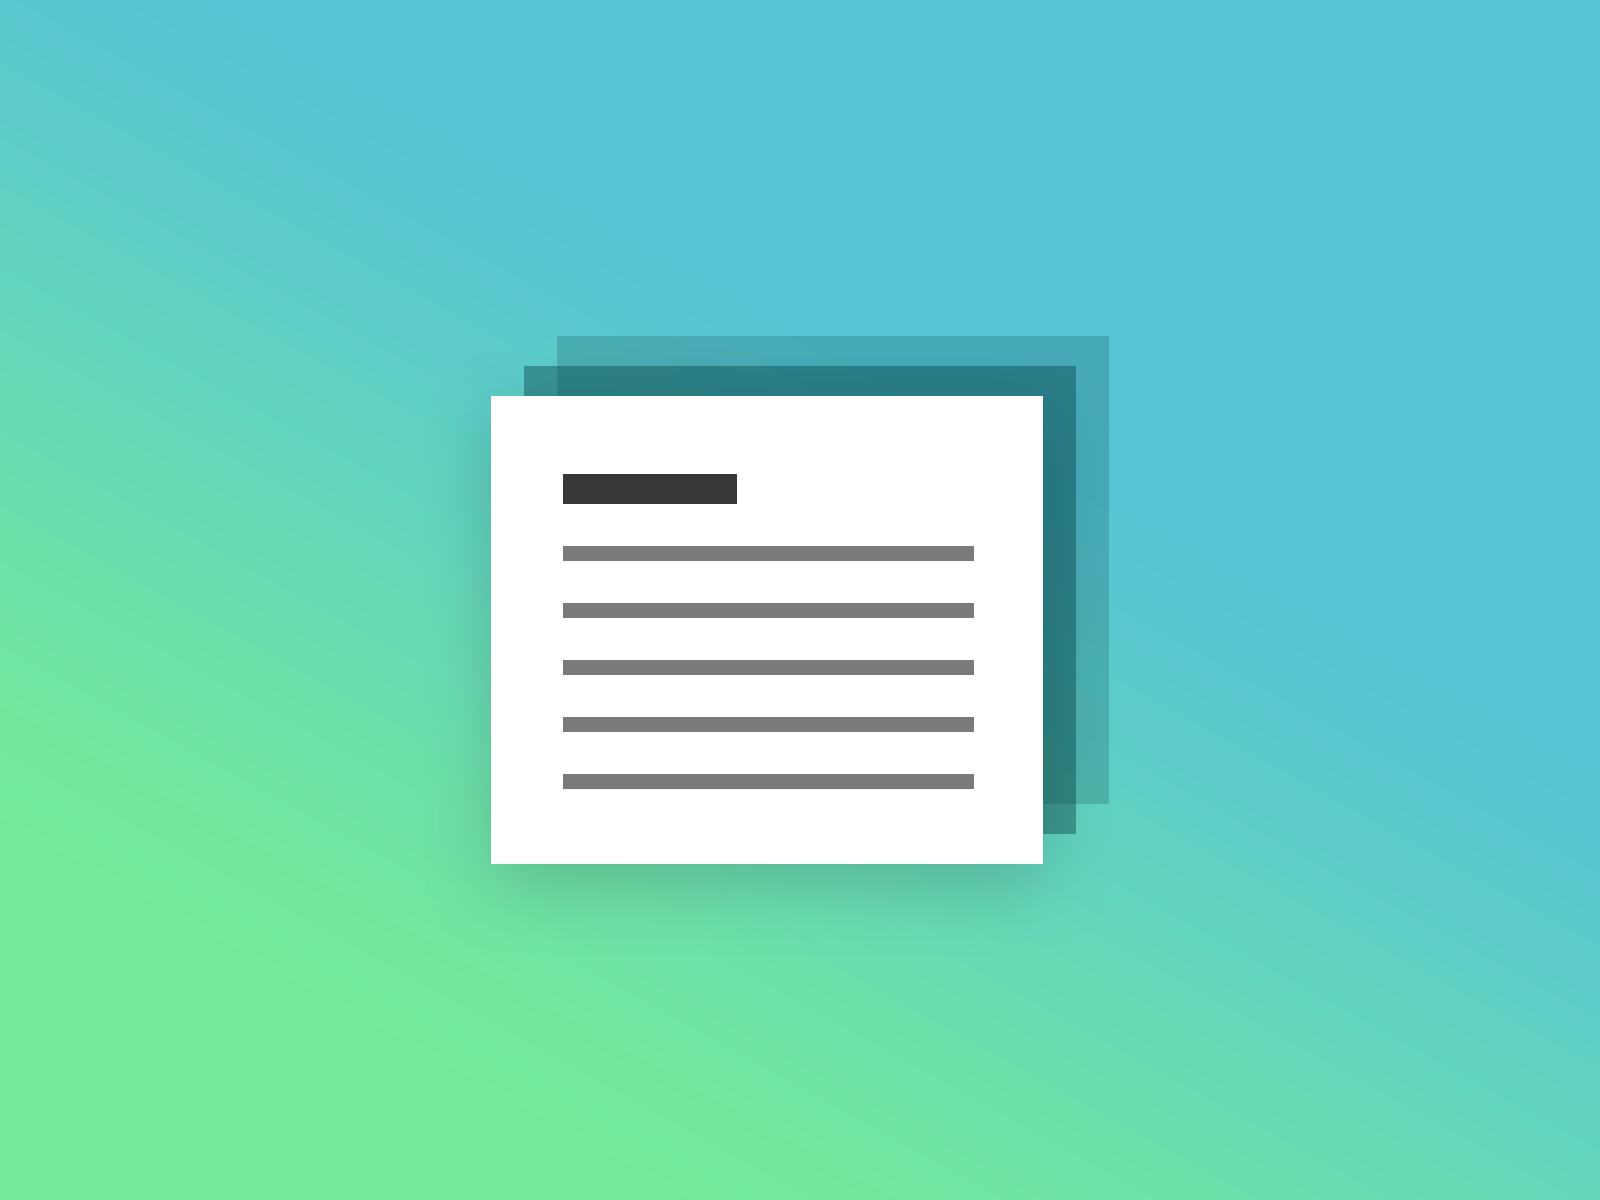 Notes Bric by TinchyRobot on Dribbble